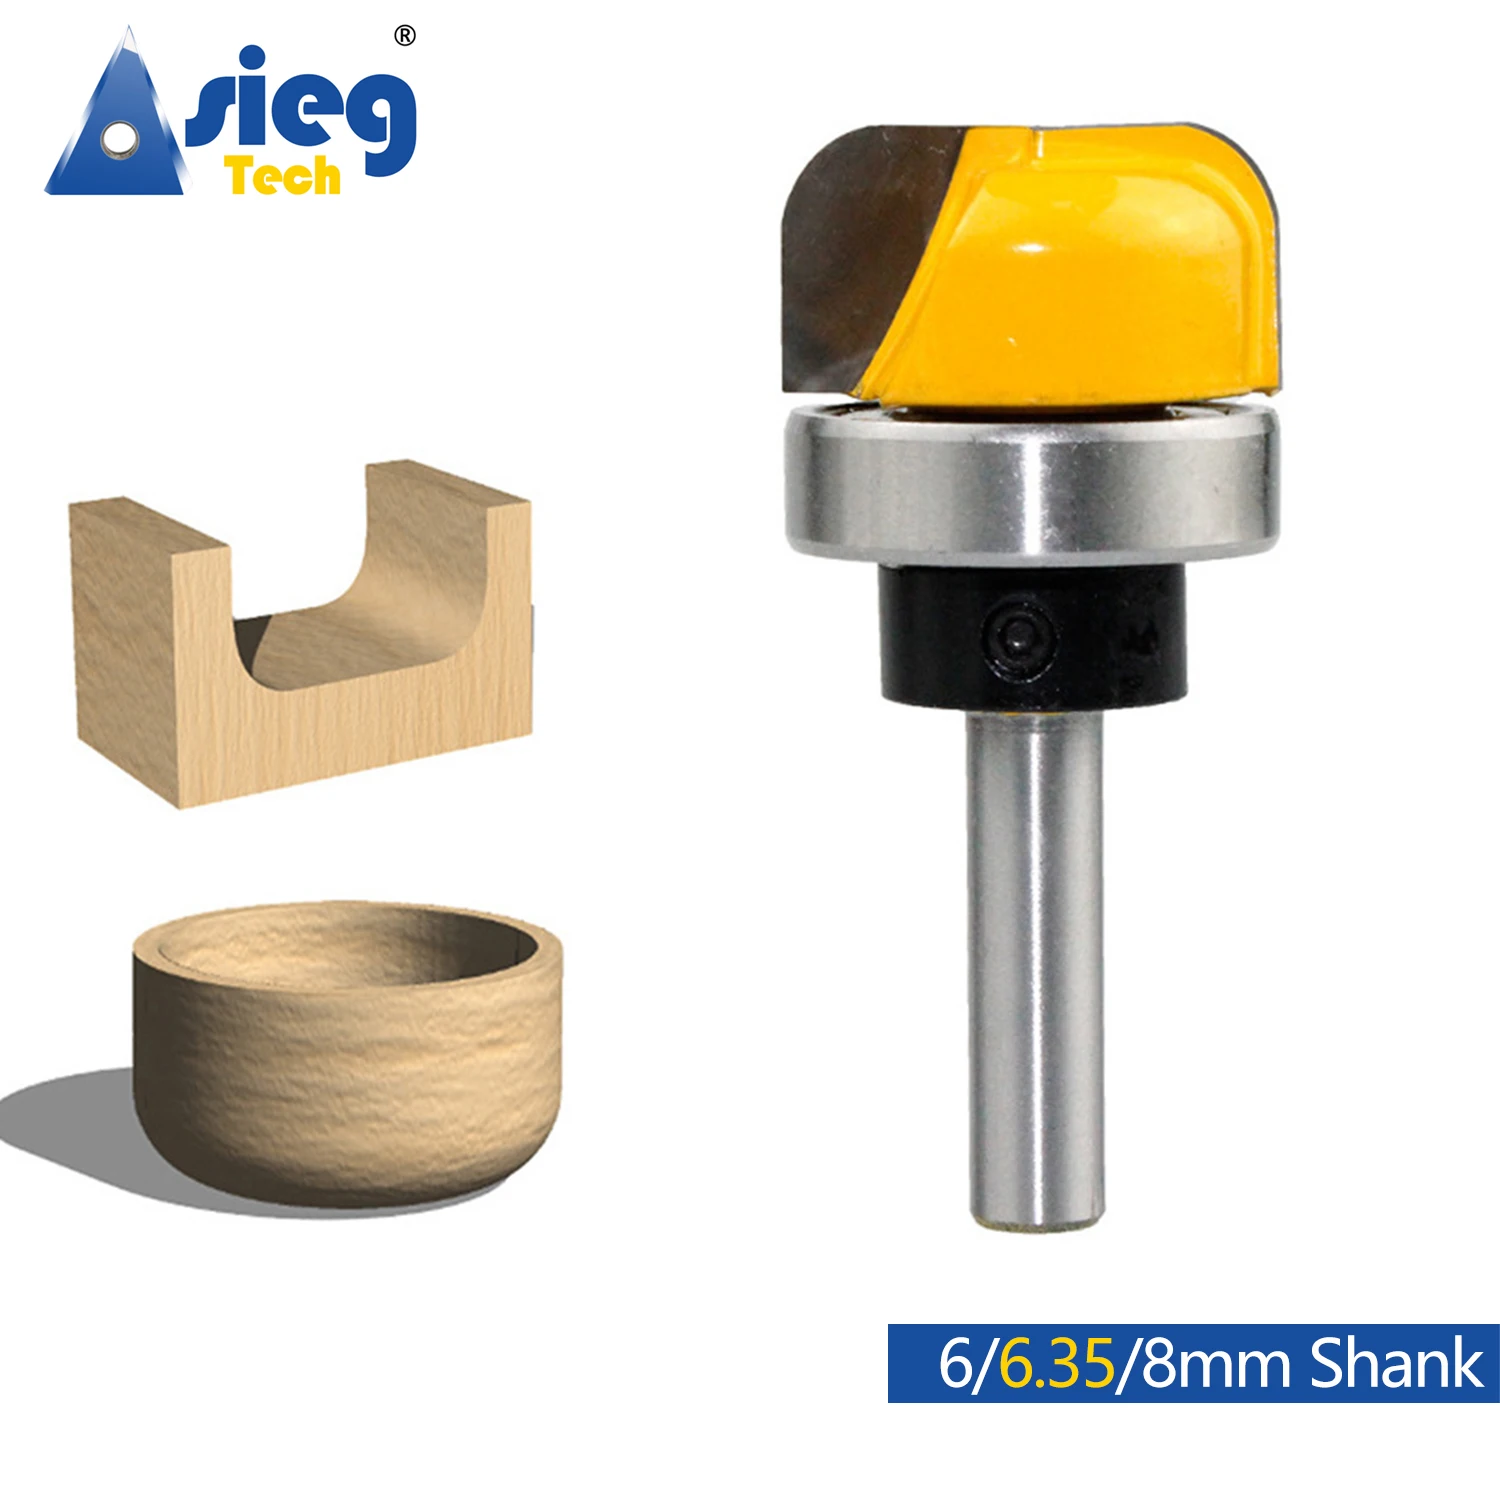 

6/6.35/8mm Shank Bowl & Tray Router Bit 1-1/8" Diameter Round Nose Milling Cutter Woodworking Corner Rounding Router Bit Tools